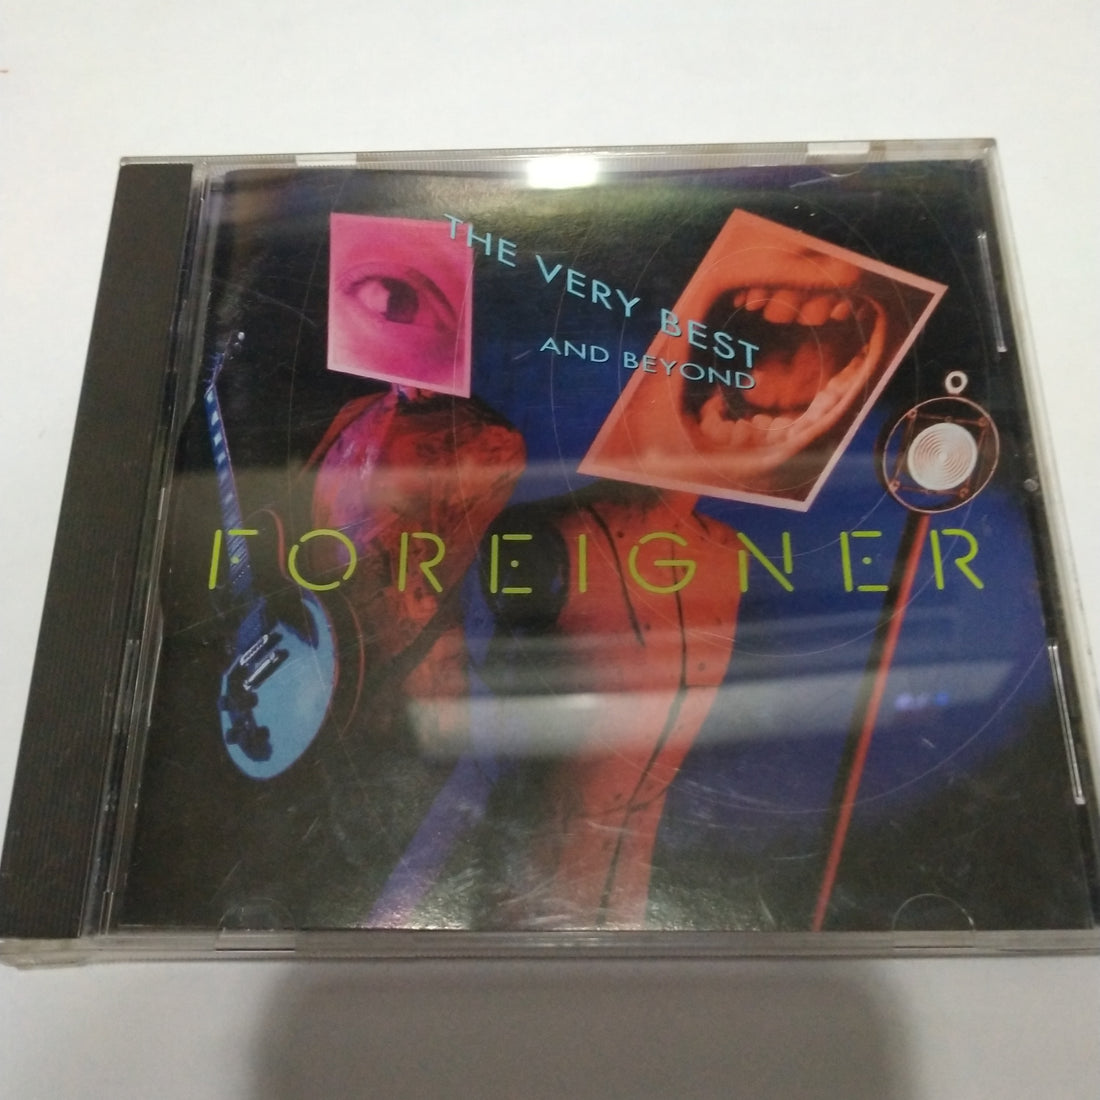 Foreigner - The Very Best...And Beyond (CD) (VG+)